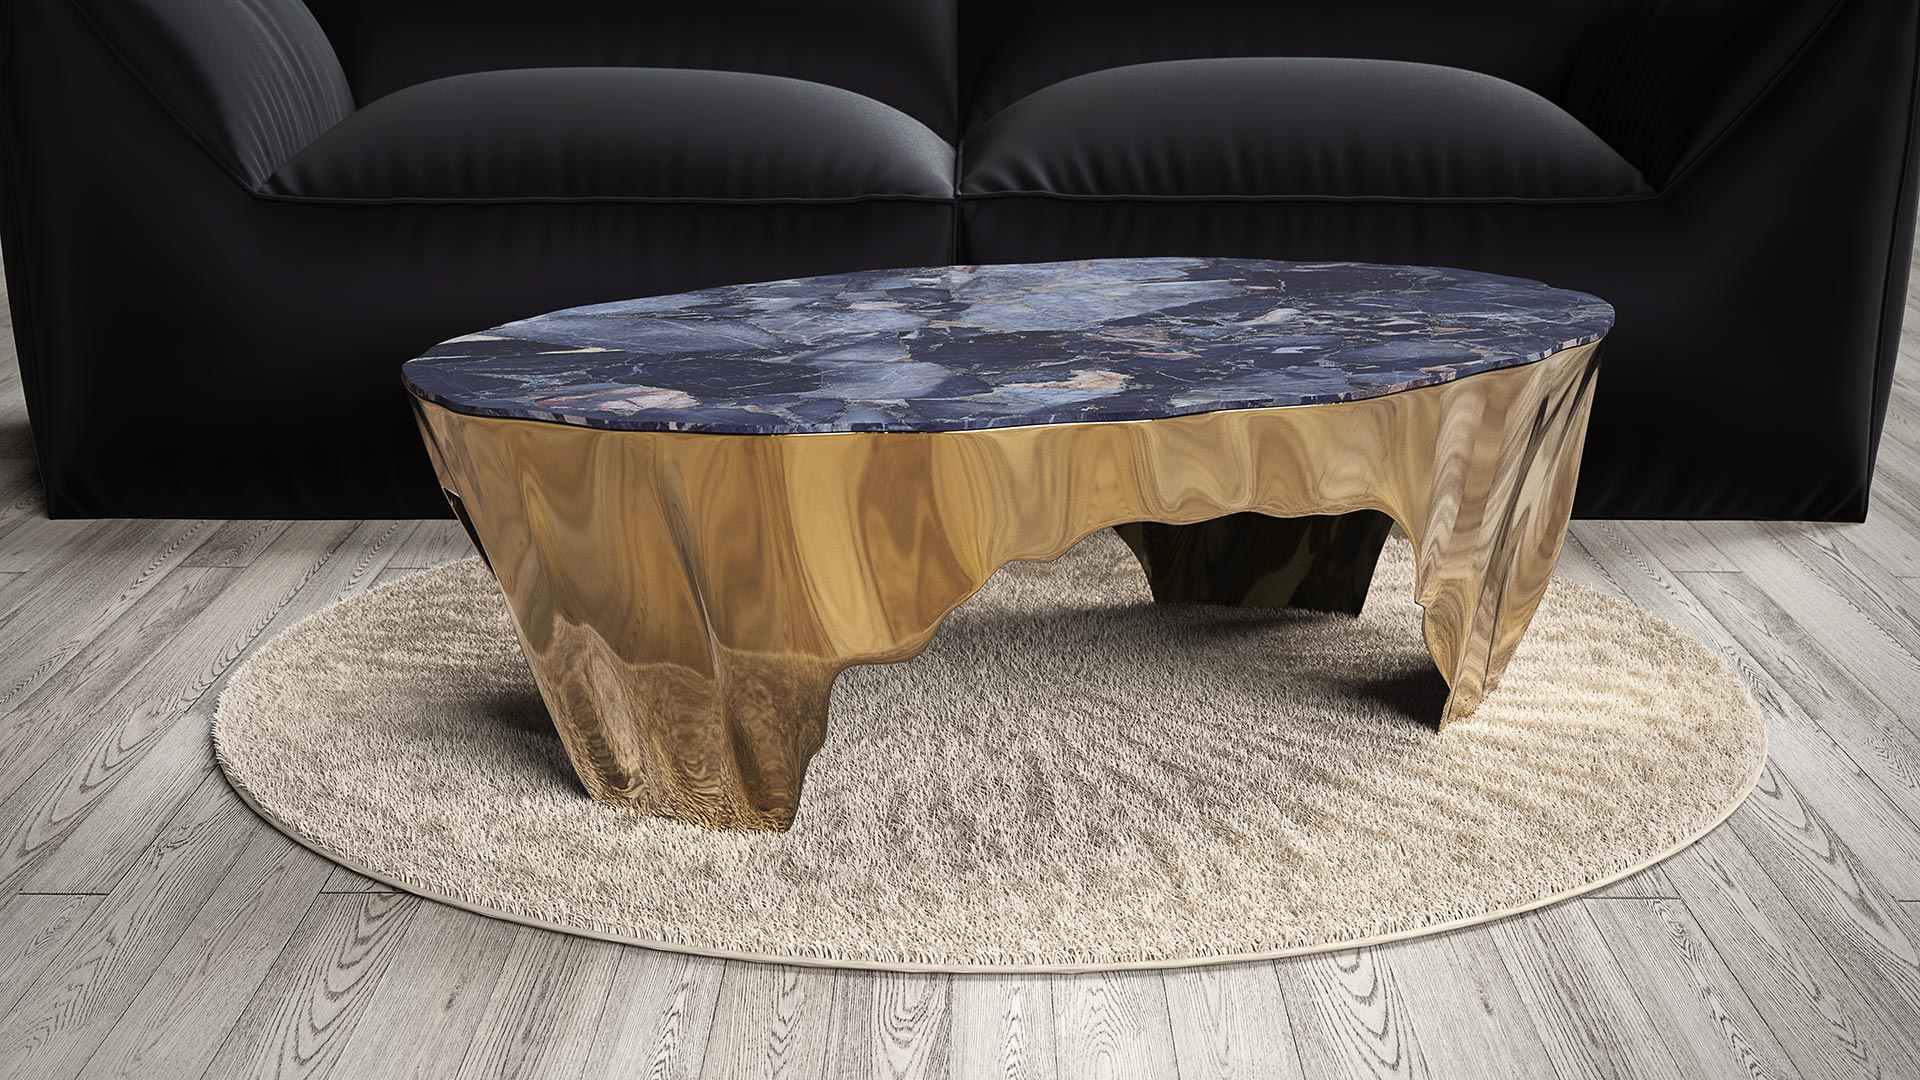 Broken Stone coffee table in real